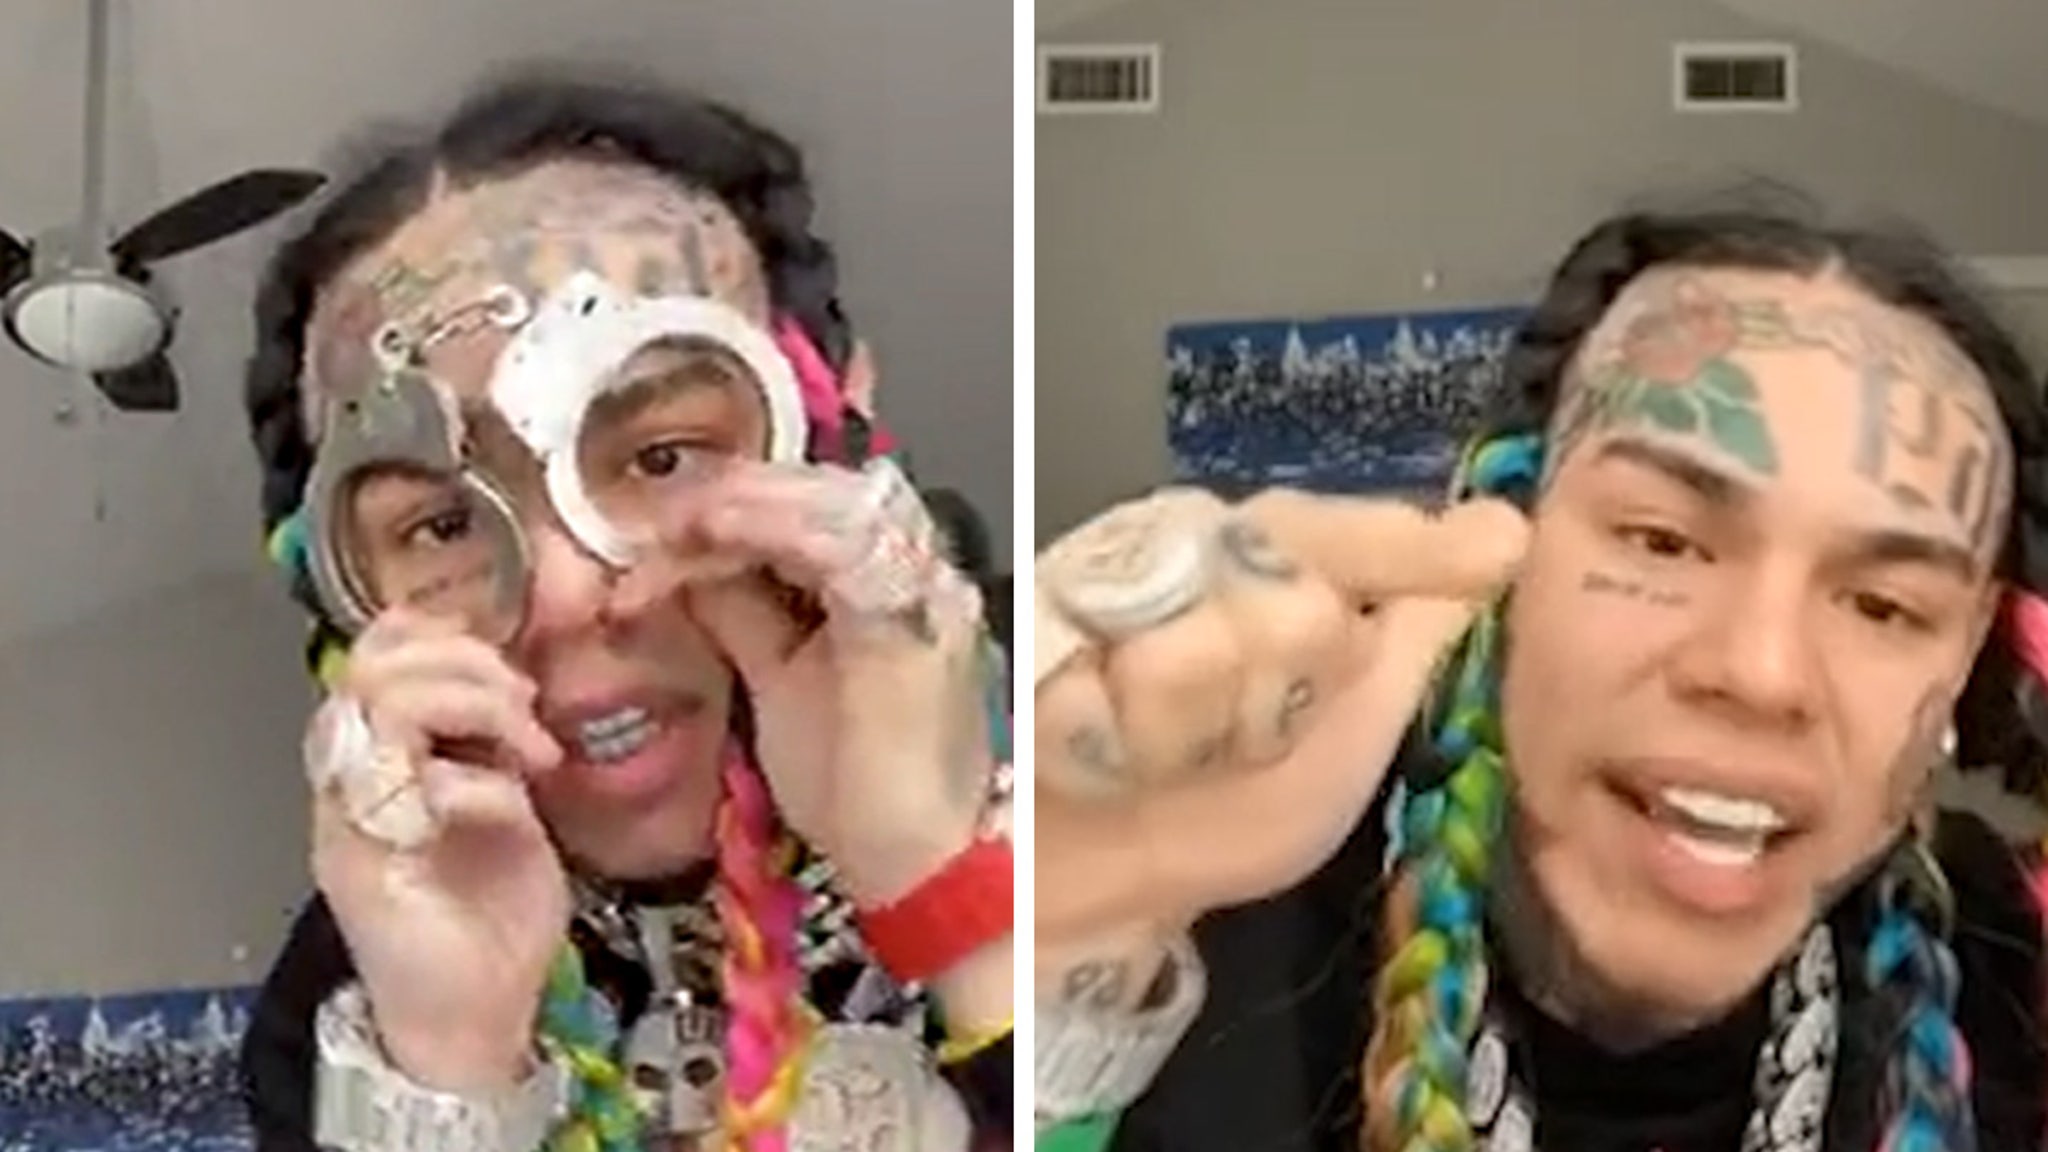 Tekashi69 Sounds Off In Live Stream Sets Records With Epic Rant